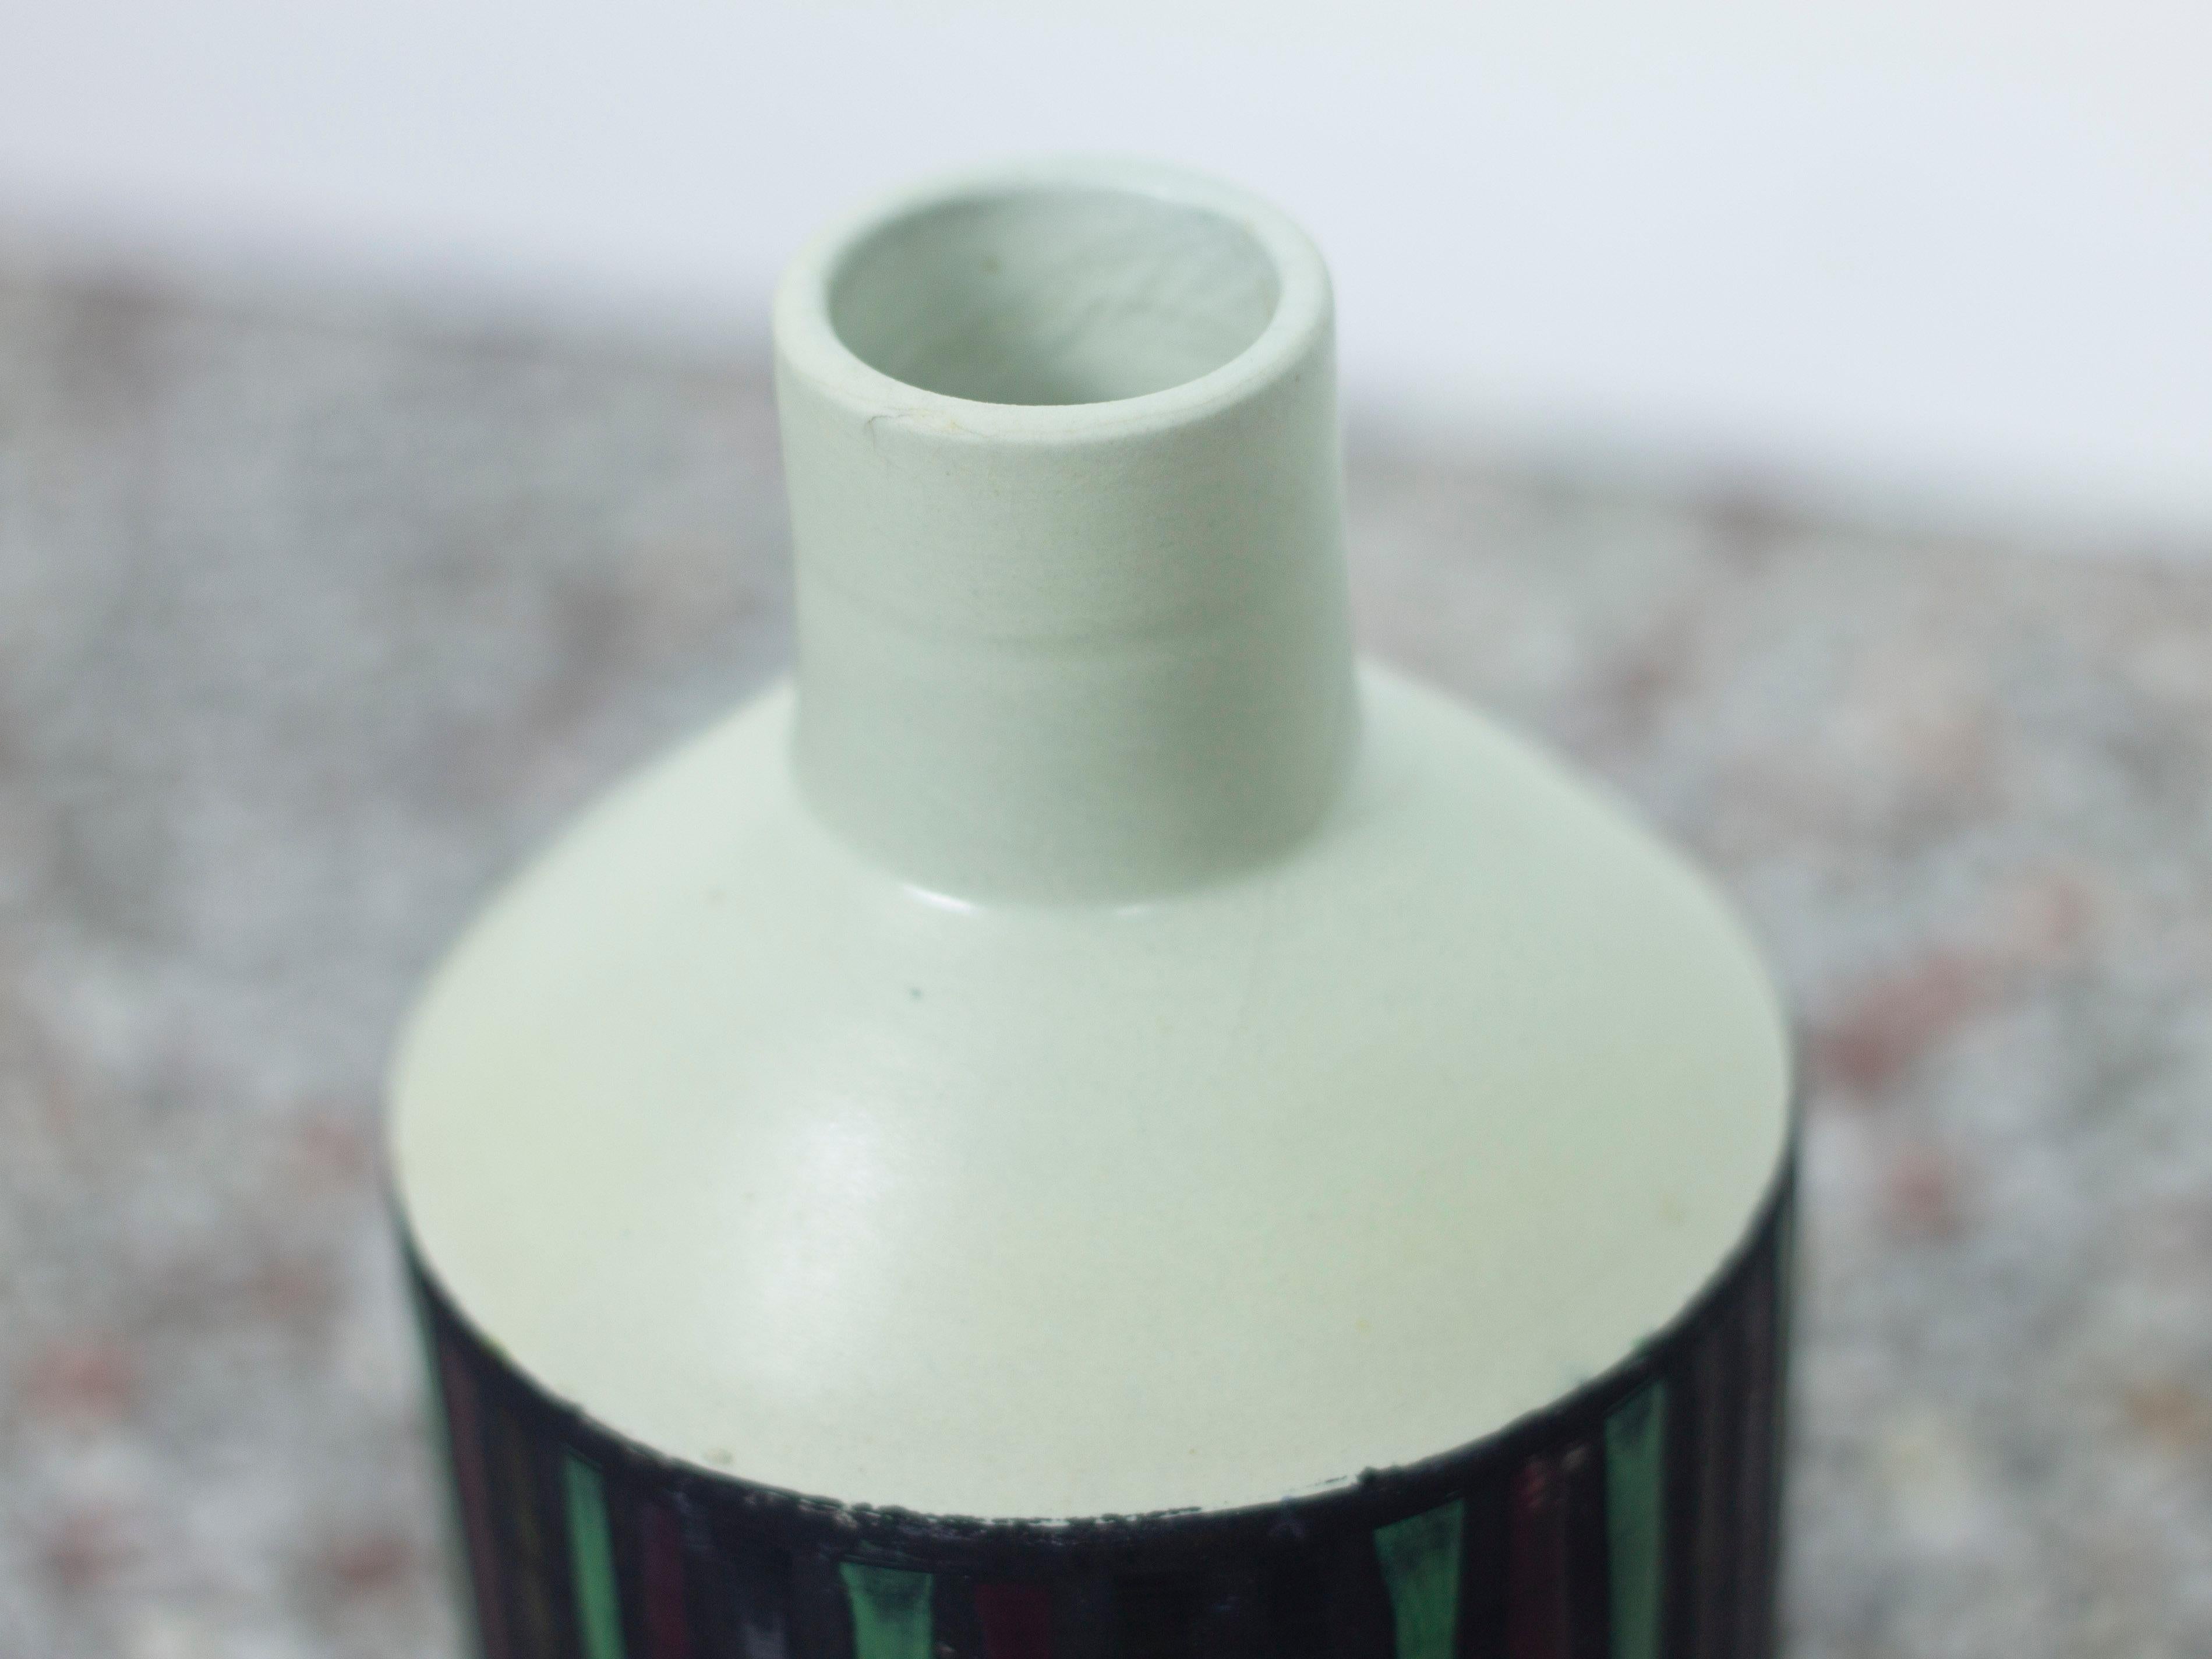 Small Ceramic Vase by Ettore Sottsass for Bitossi, 1959 For Sale 5